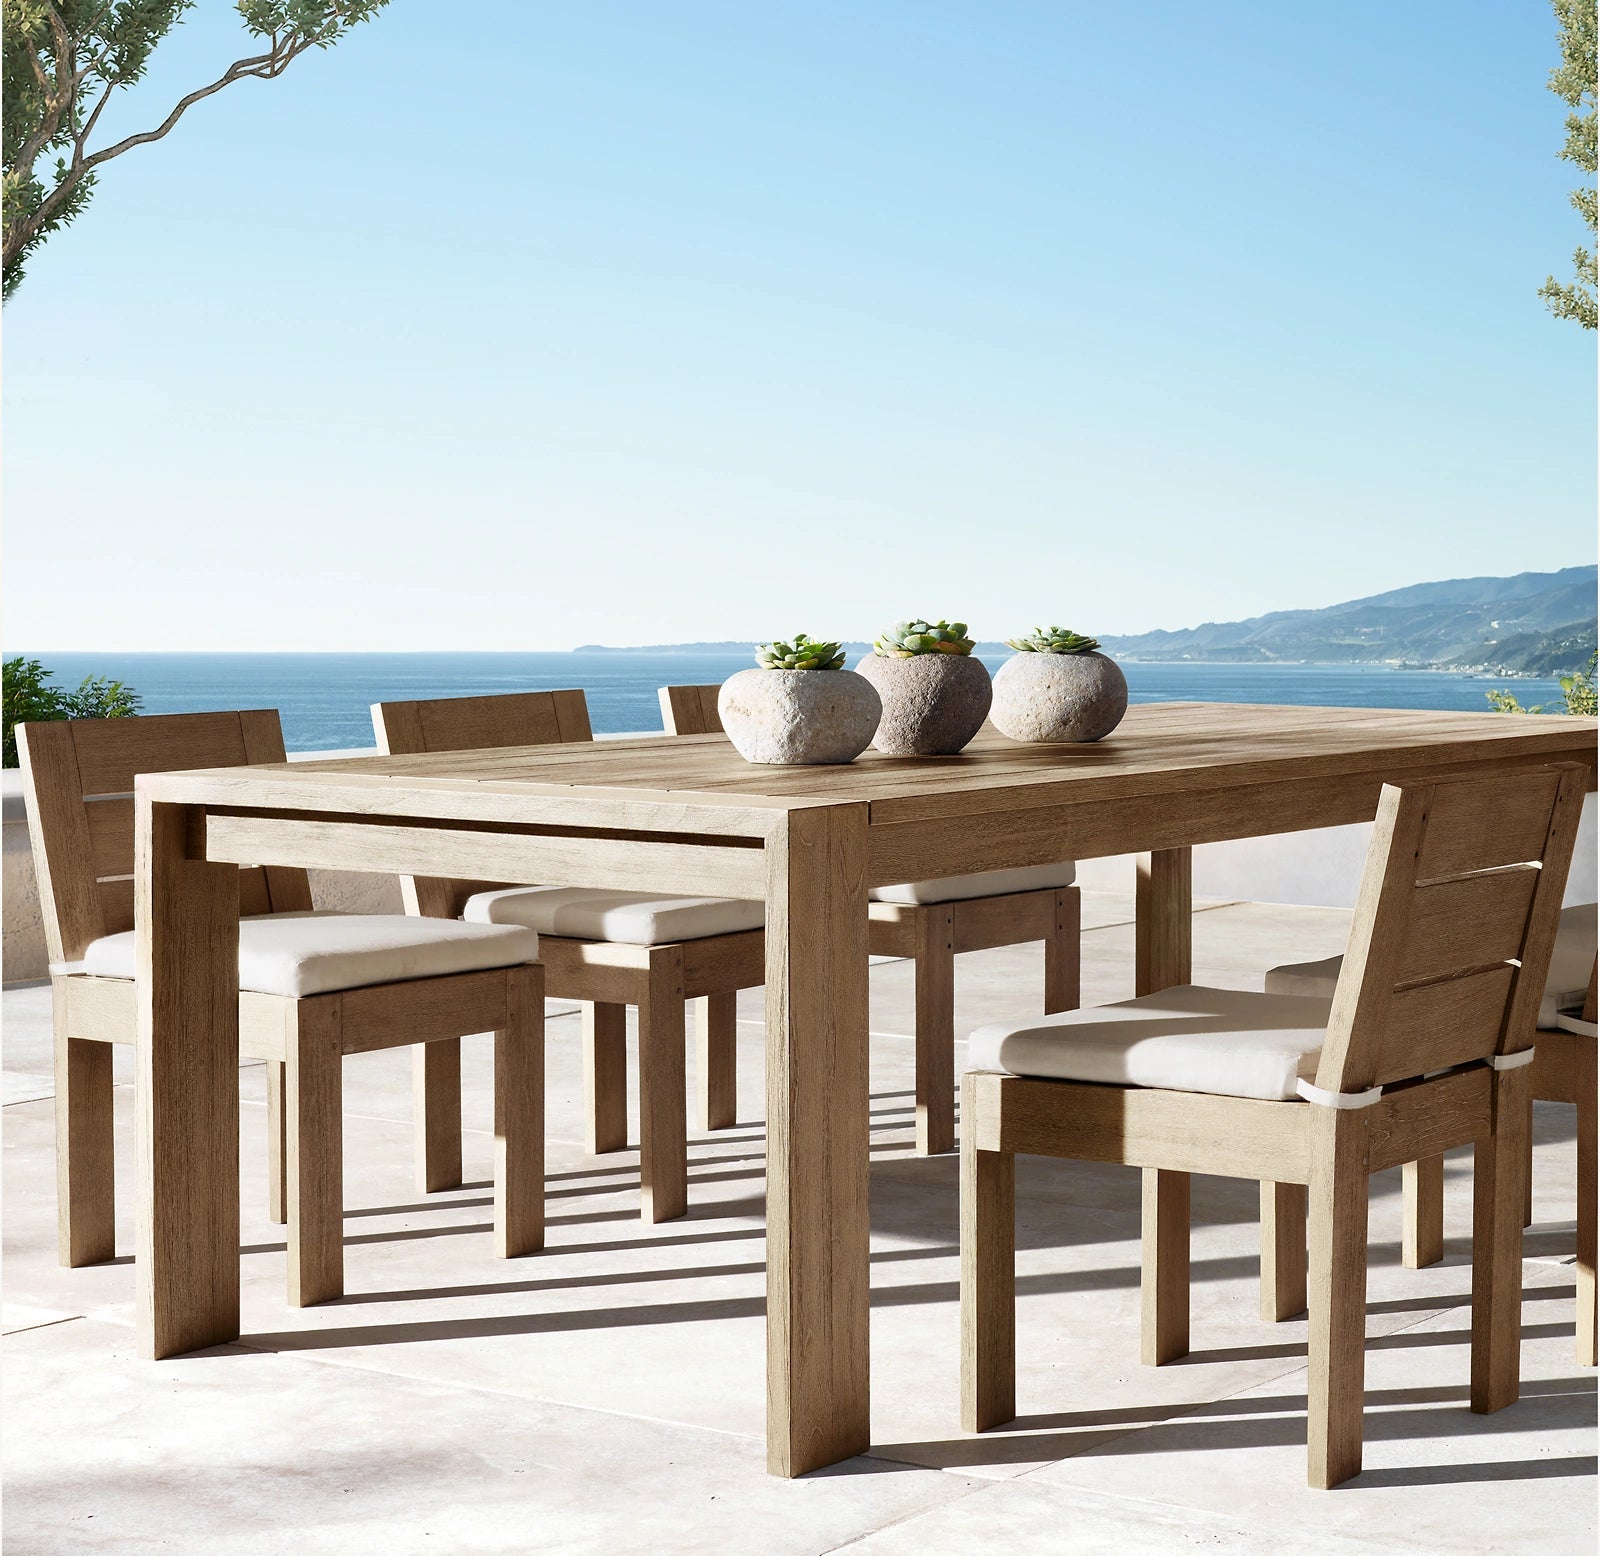 Del Ray Collection- Outdoor Premium Teak Wood Dining Set - Sunzout Outdoor Spaces LLC